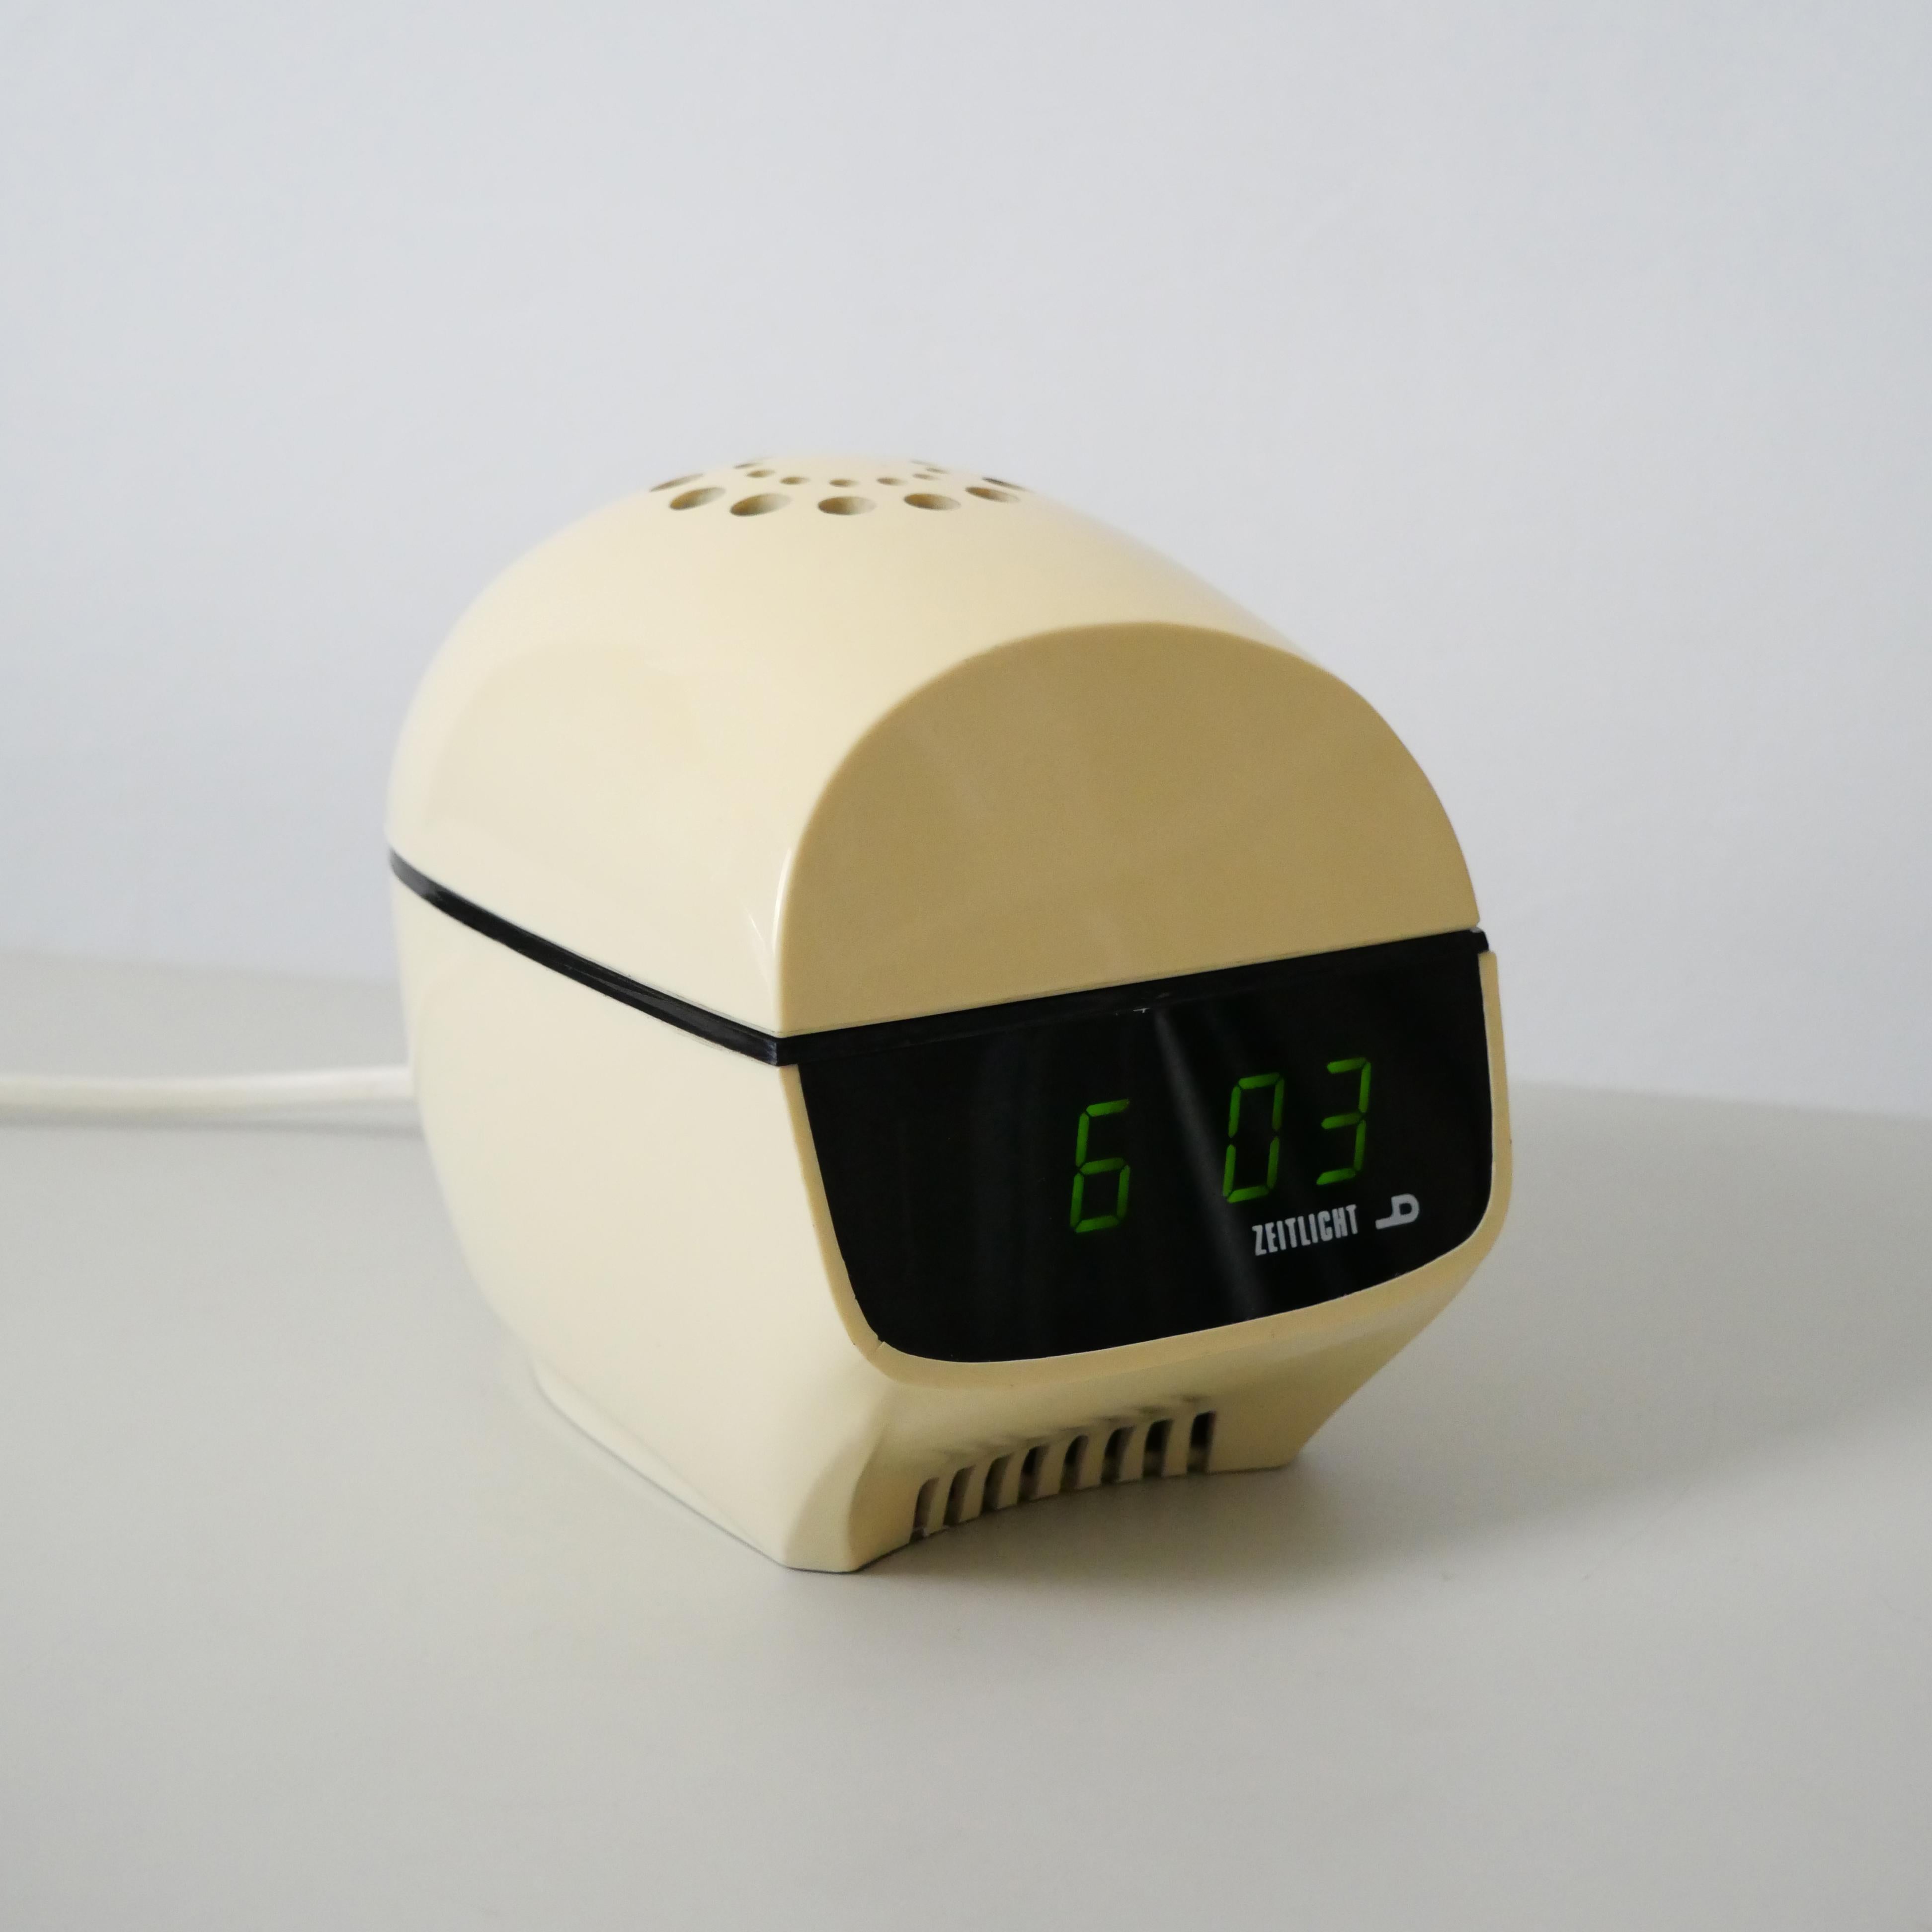 ZEITLICHT model EX-60G, manufactured by Timco (HK) Ltd, c. 1970

Super space-age era adjustable lamp and LED alarm clock, in the style of Joe Colombo, Verner Panton, Ettore Sottsass.

Good original condition, fully functioning.
Dimensions